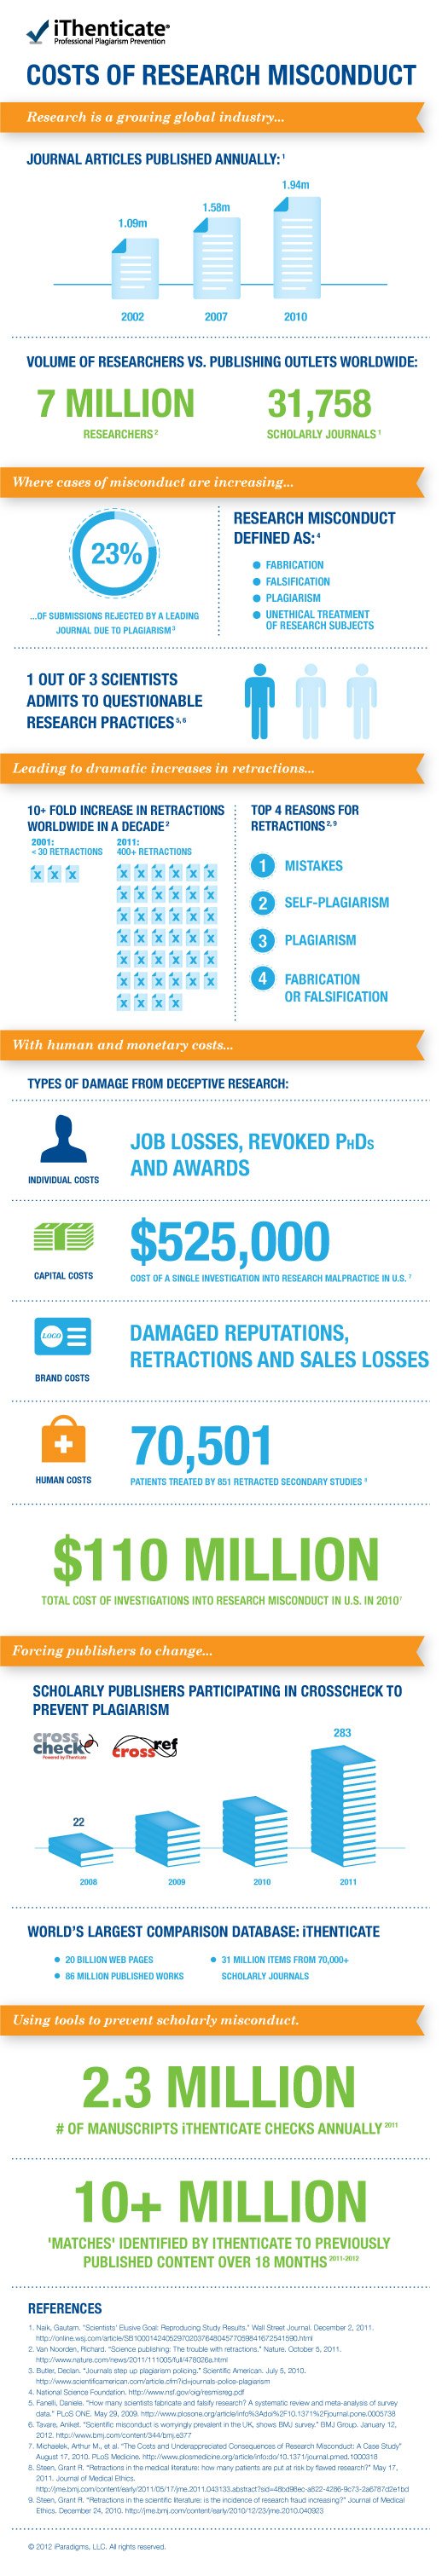 Research Misconduct Infographic